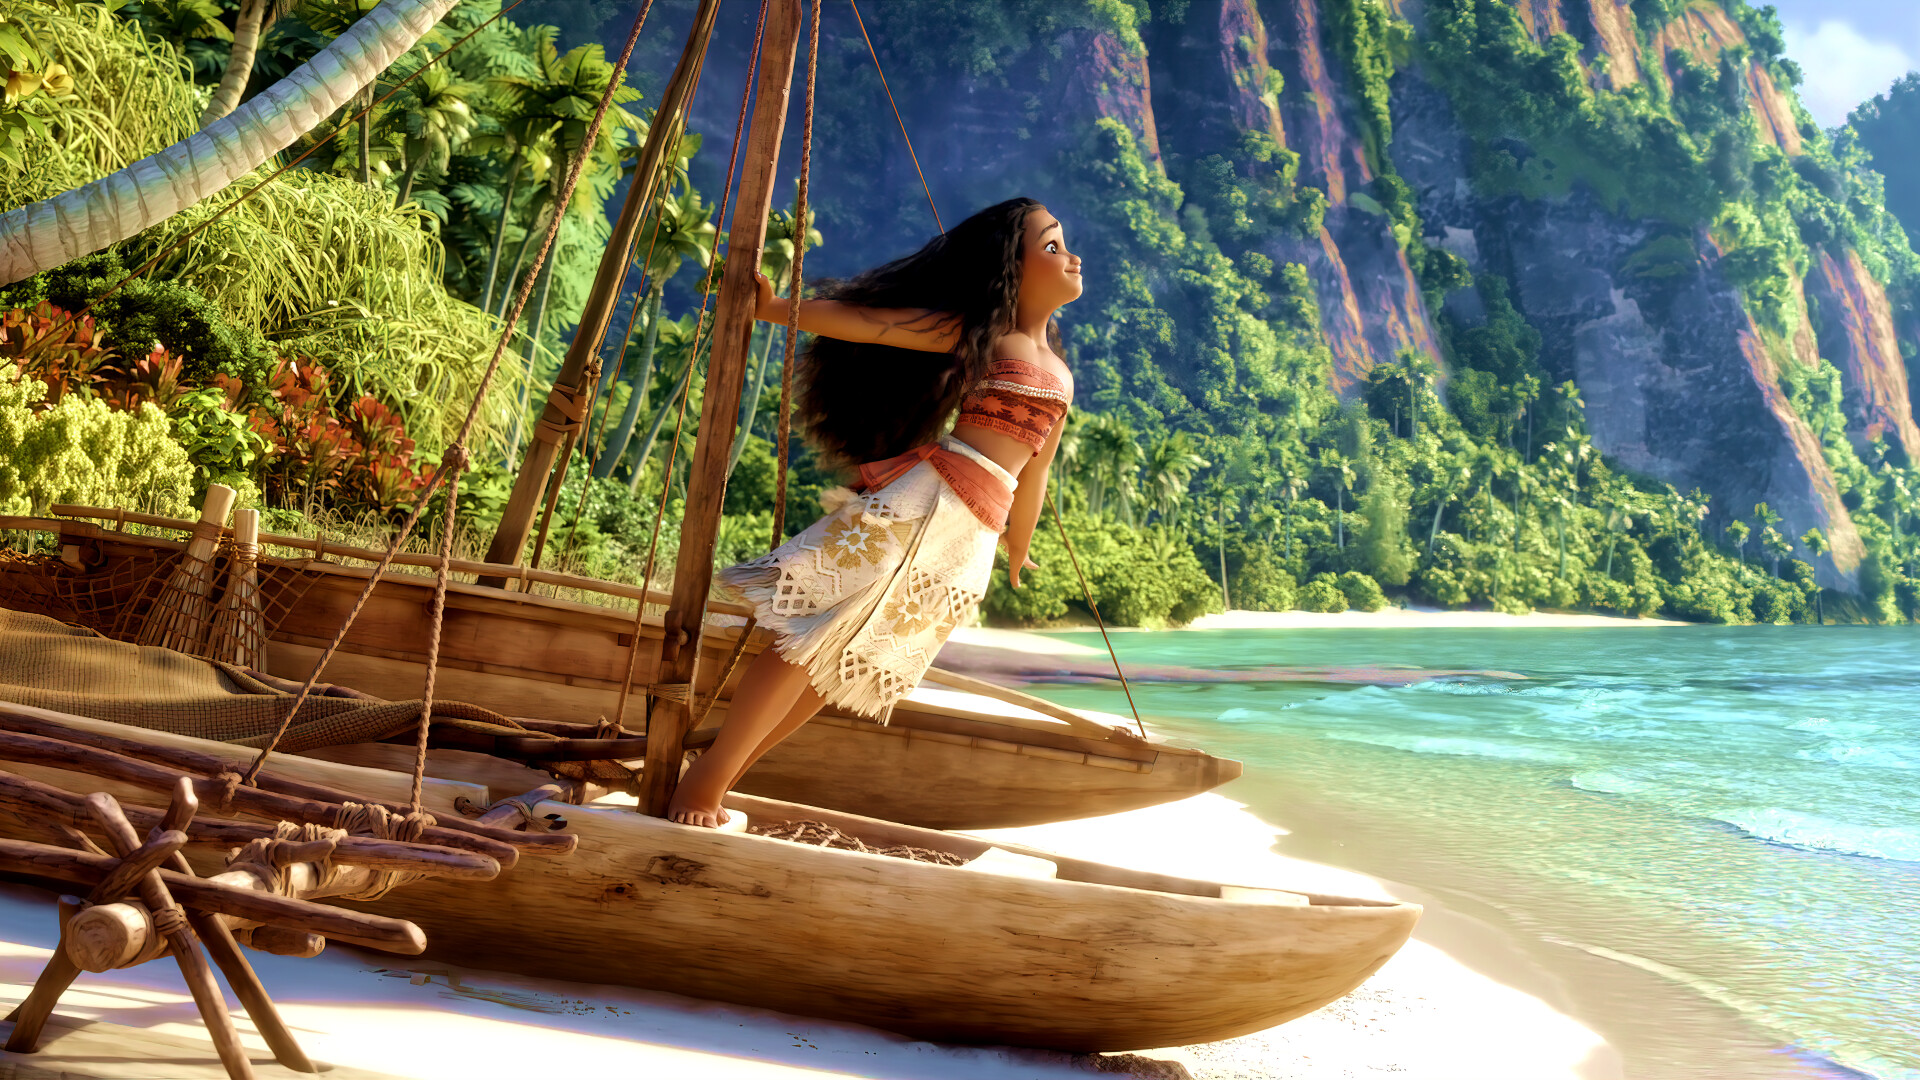 Moana: Disney's character, Lives on an island in the ancient South Pacific. 1920x1080 Full HD Background.